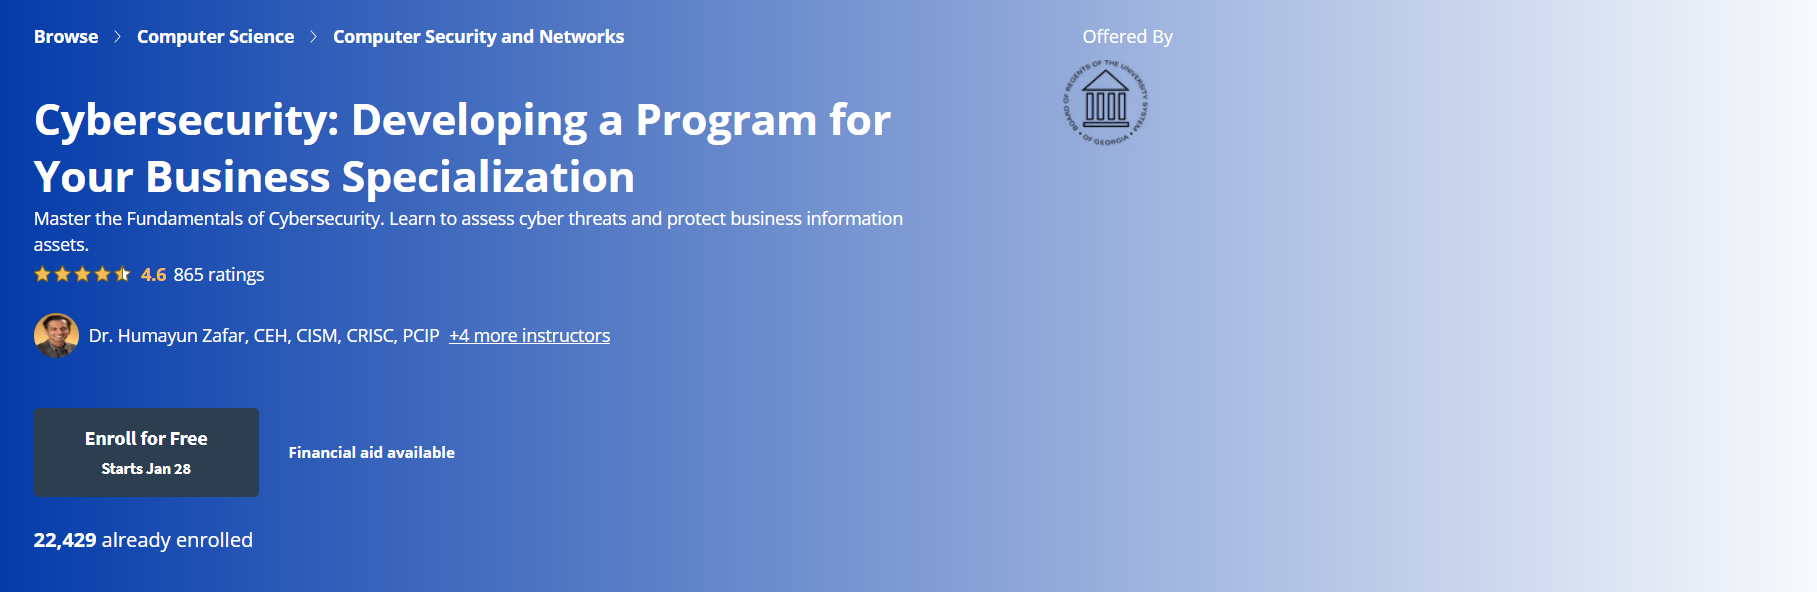 Developing a Program for Your Business Specialization